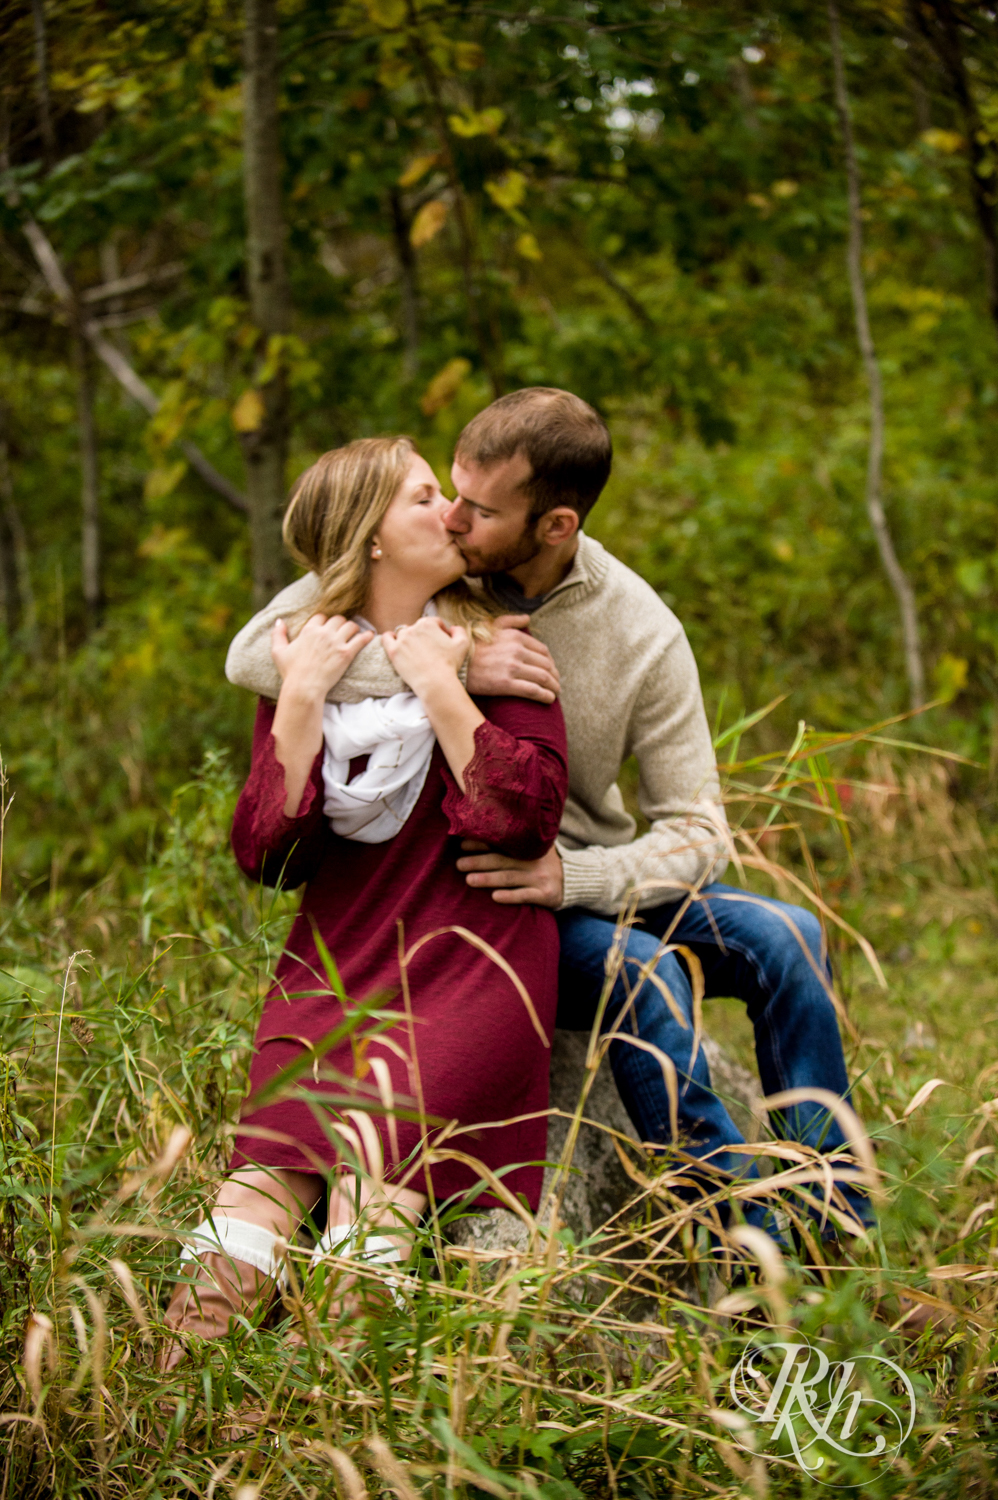 Man in sweater and woman in red dress kiss at Lebanon Hills Regional Park in Eagan, Minnesota.